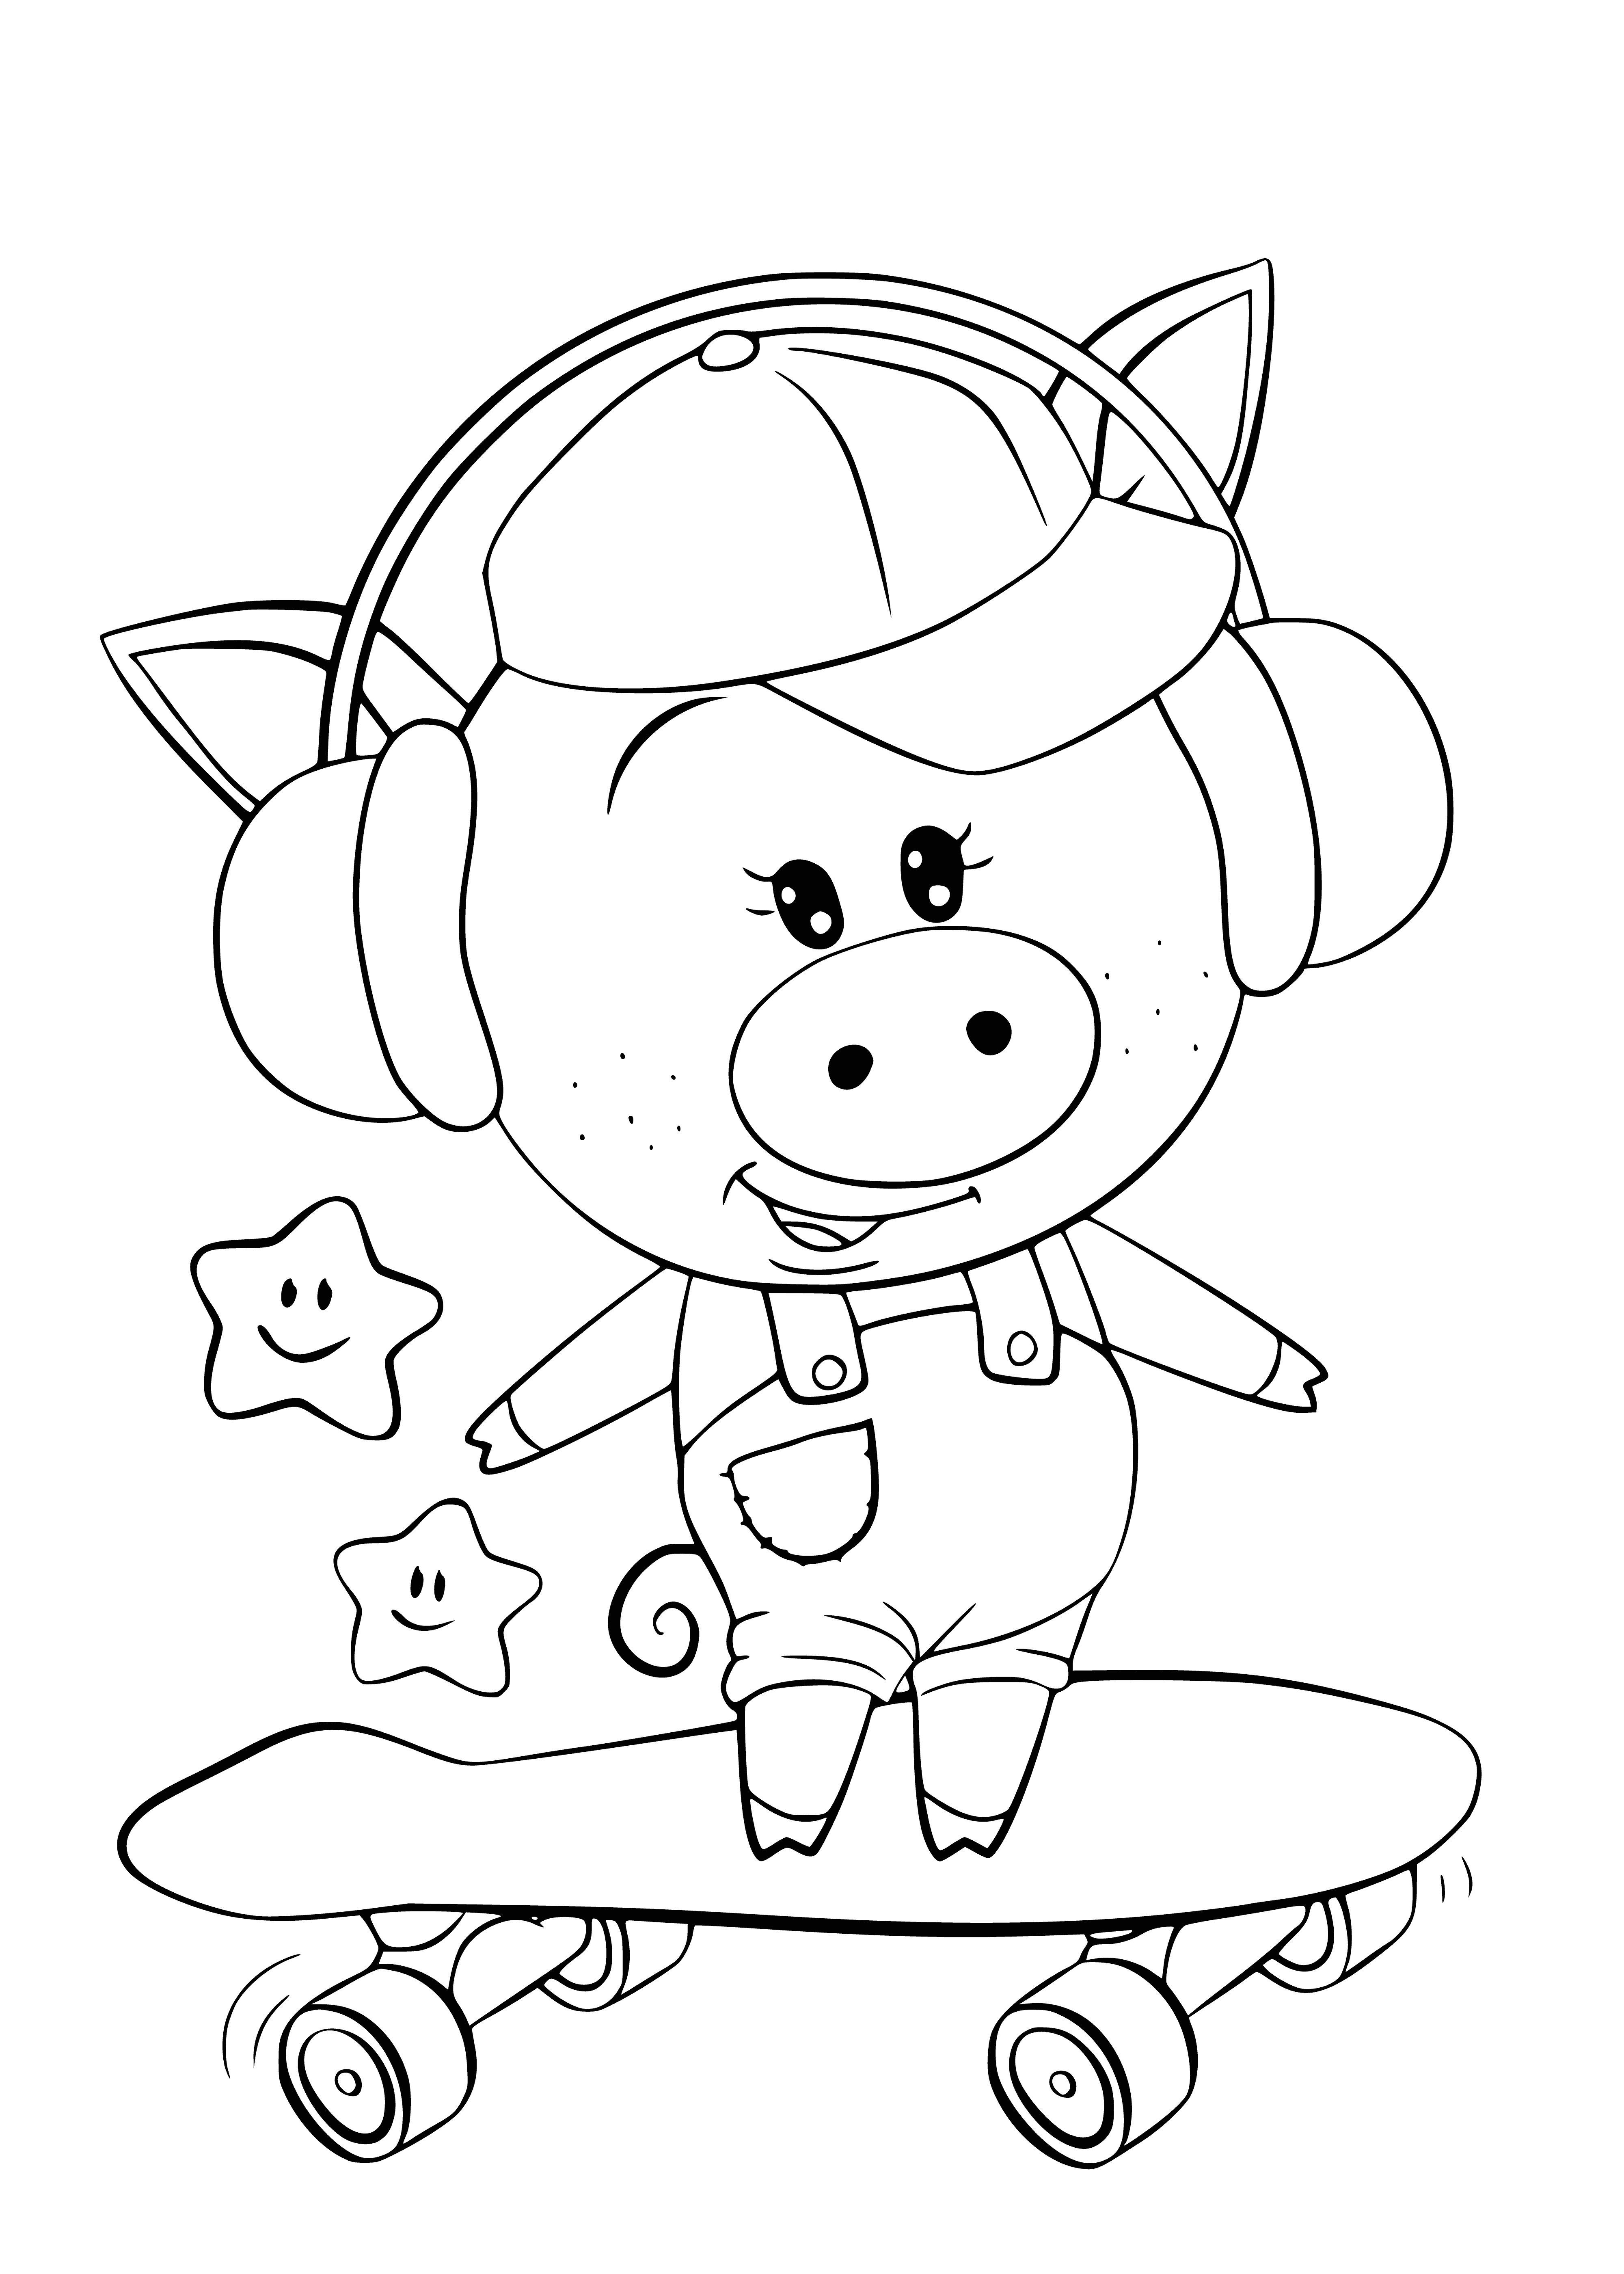 Pig on a skateboard coloring page